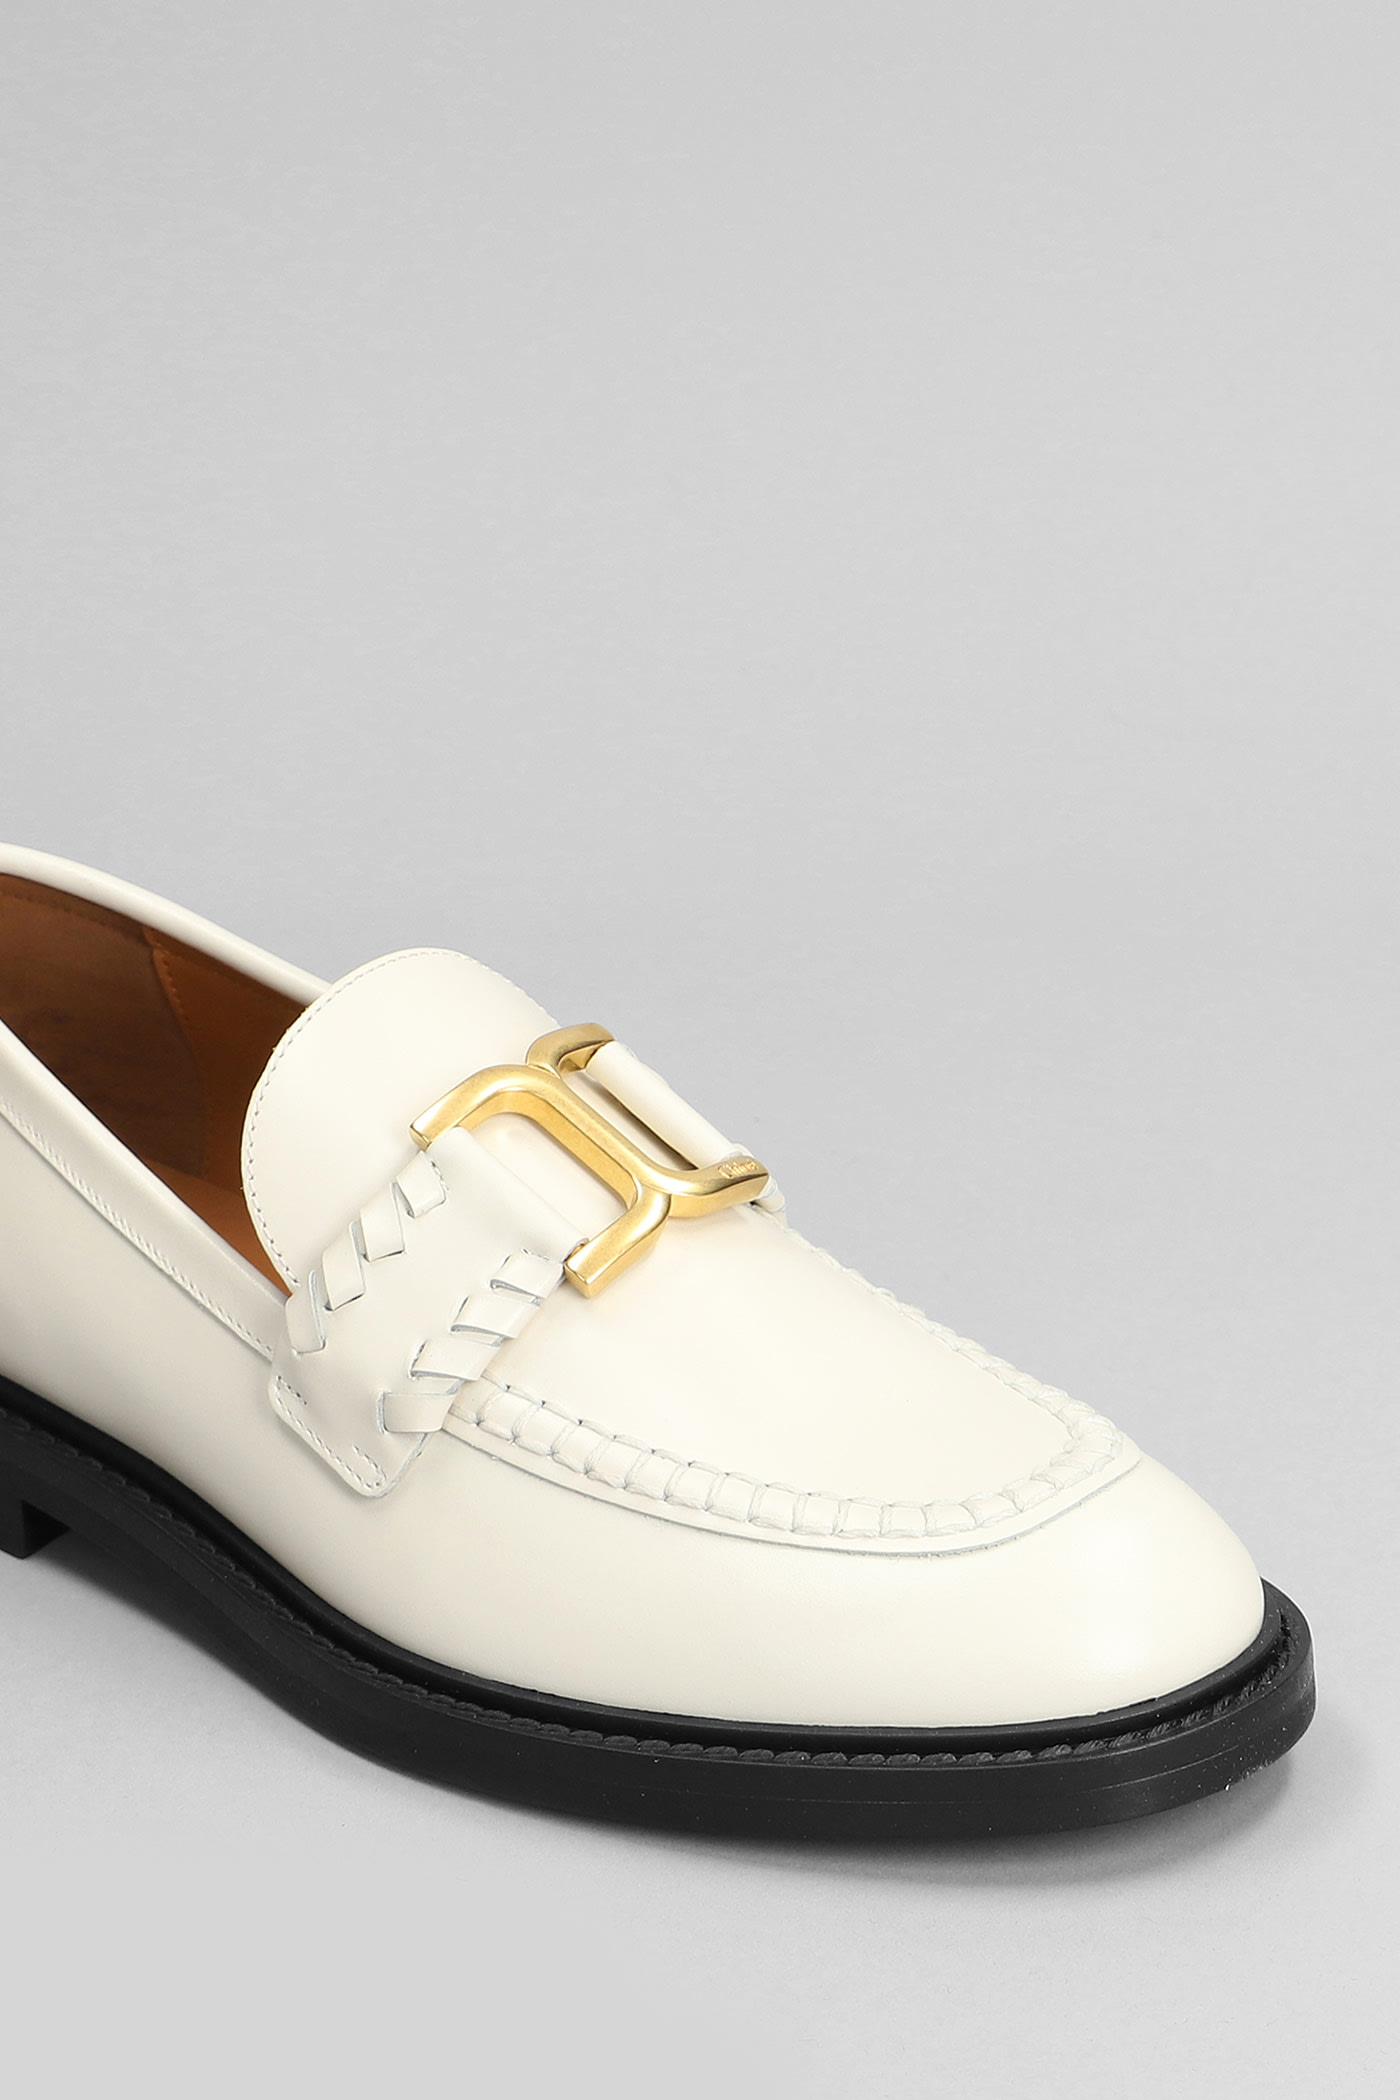 Shop Chloé Mercie Loafers In White Leather